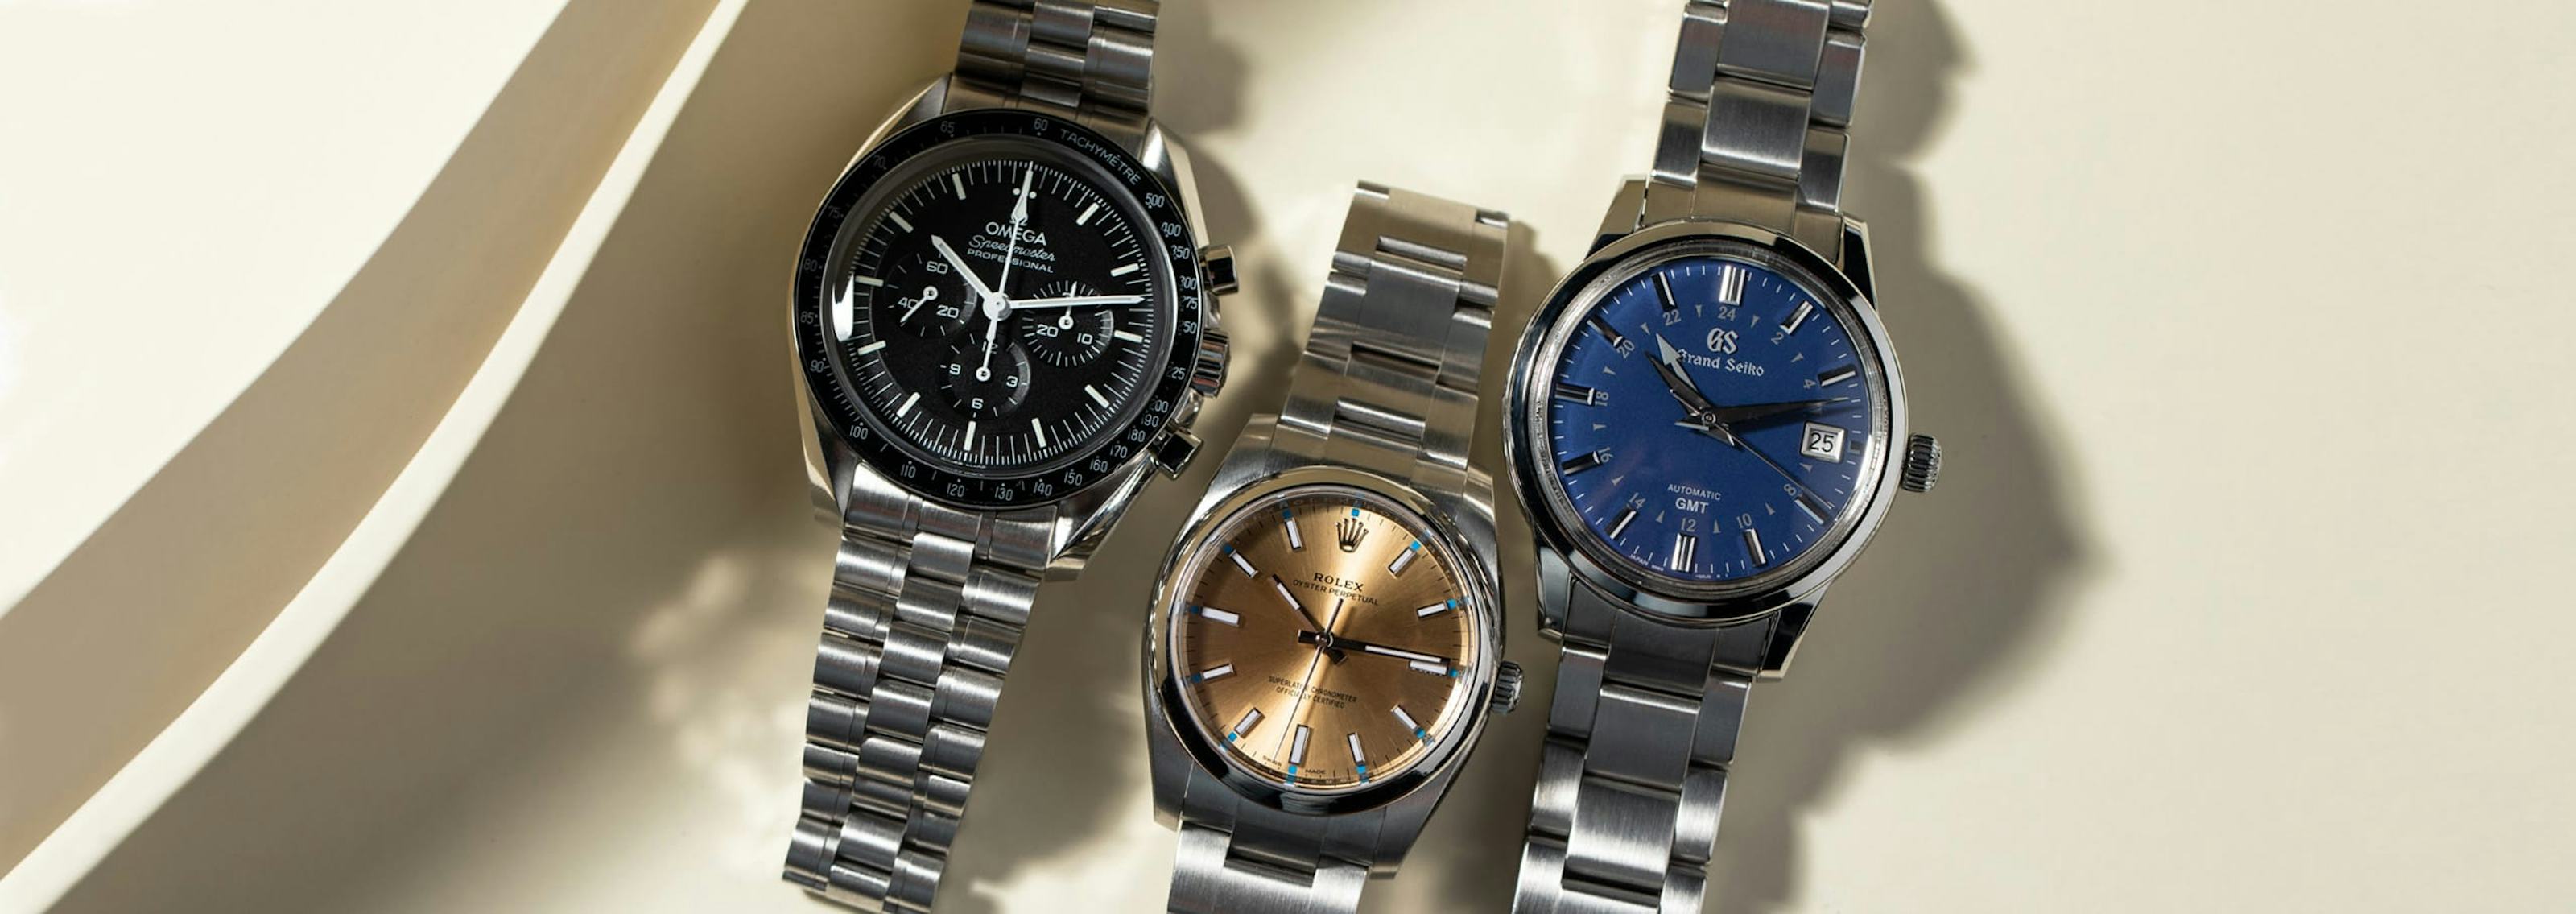 Graduation Gifts: The Watch Edition